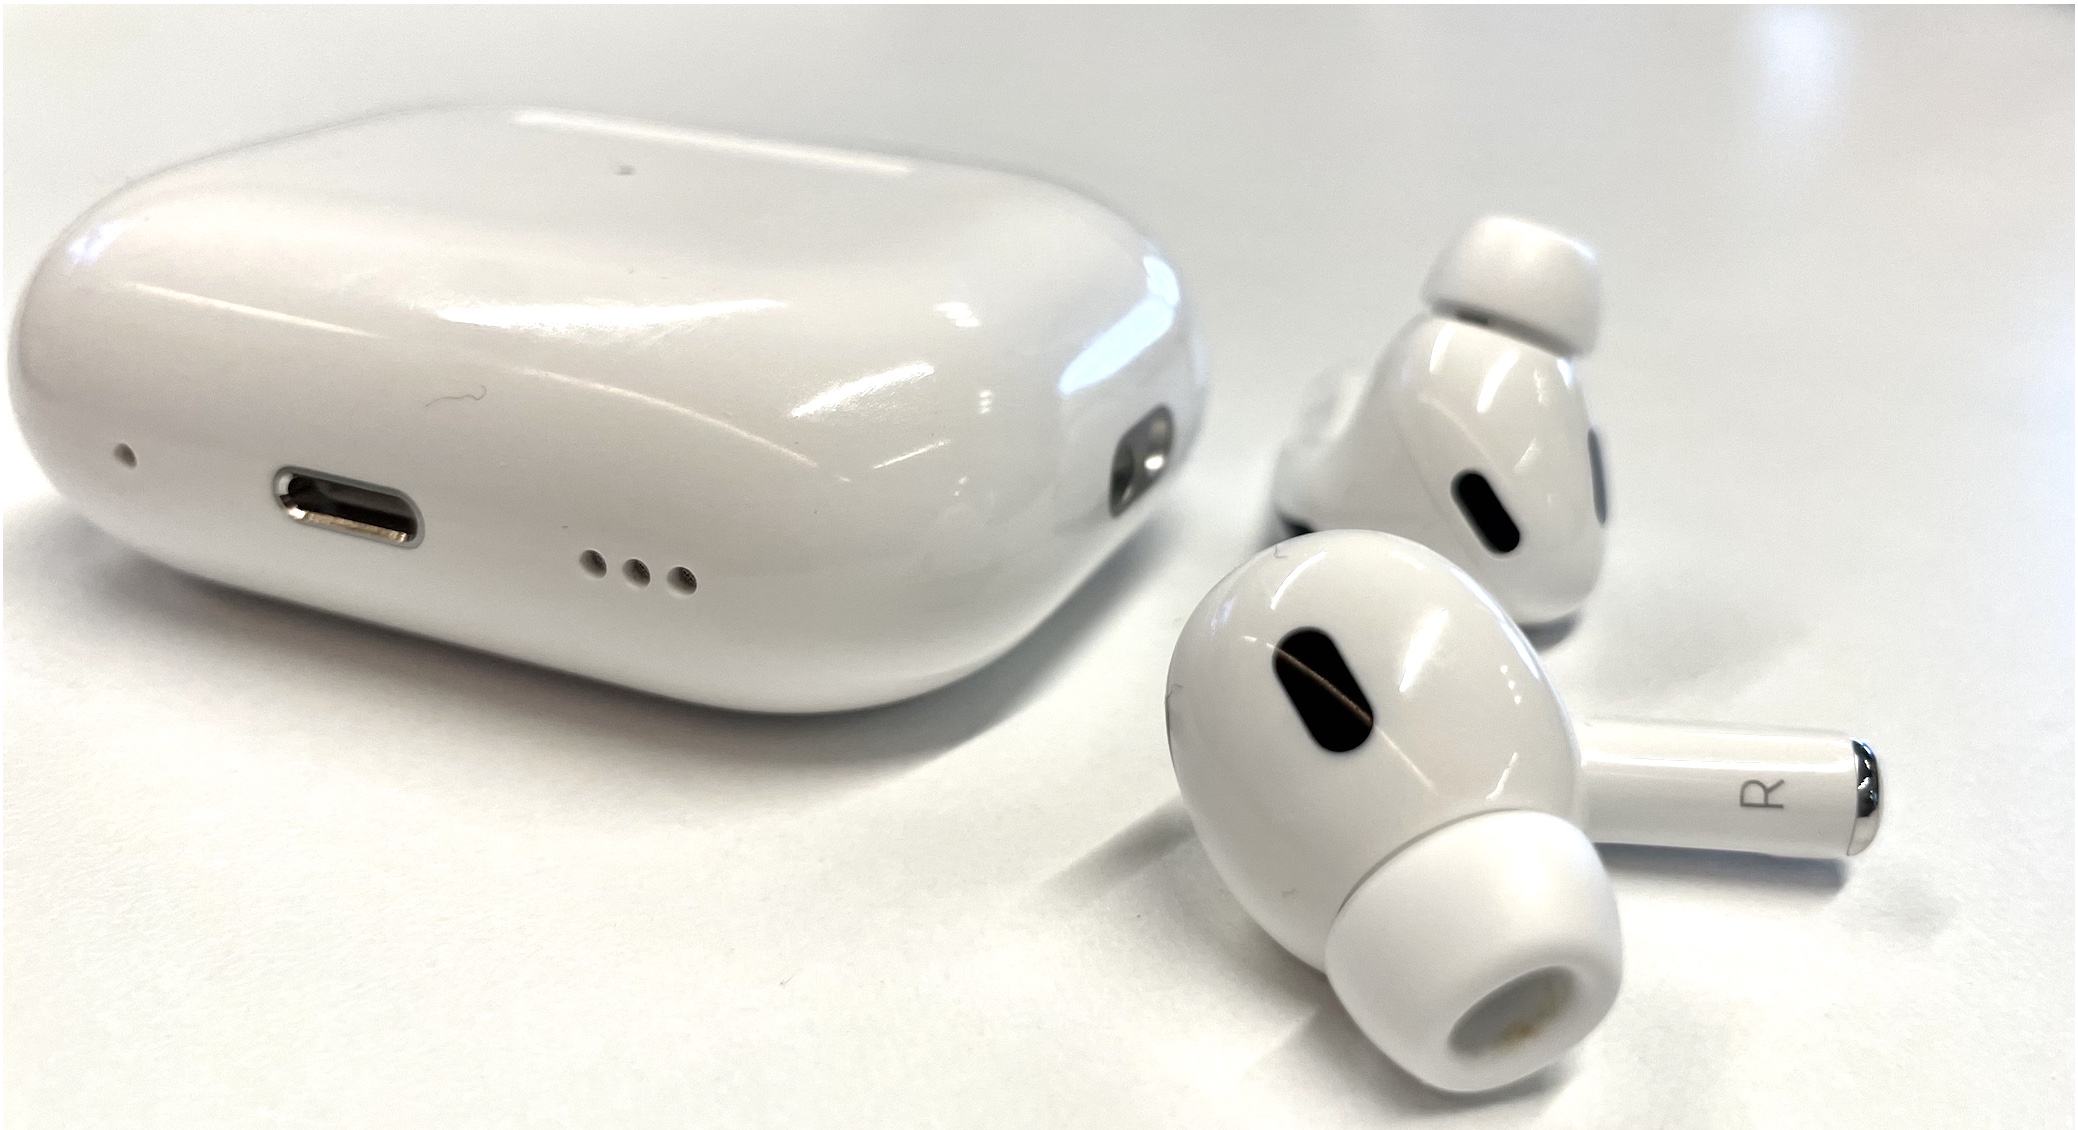 Apple AirPods Pro (2nd Gen) review: Two major upgrades